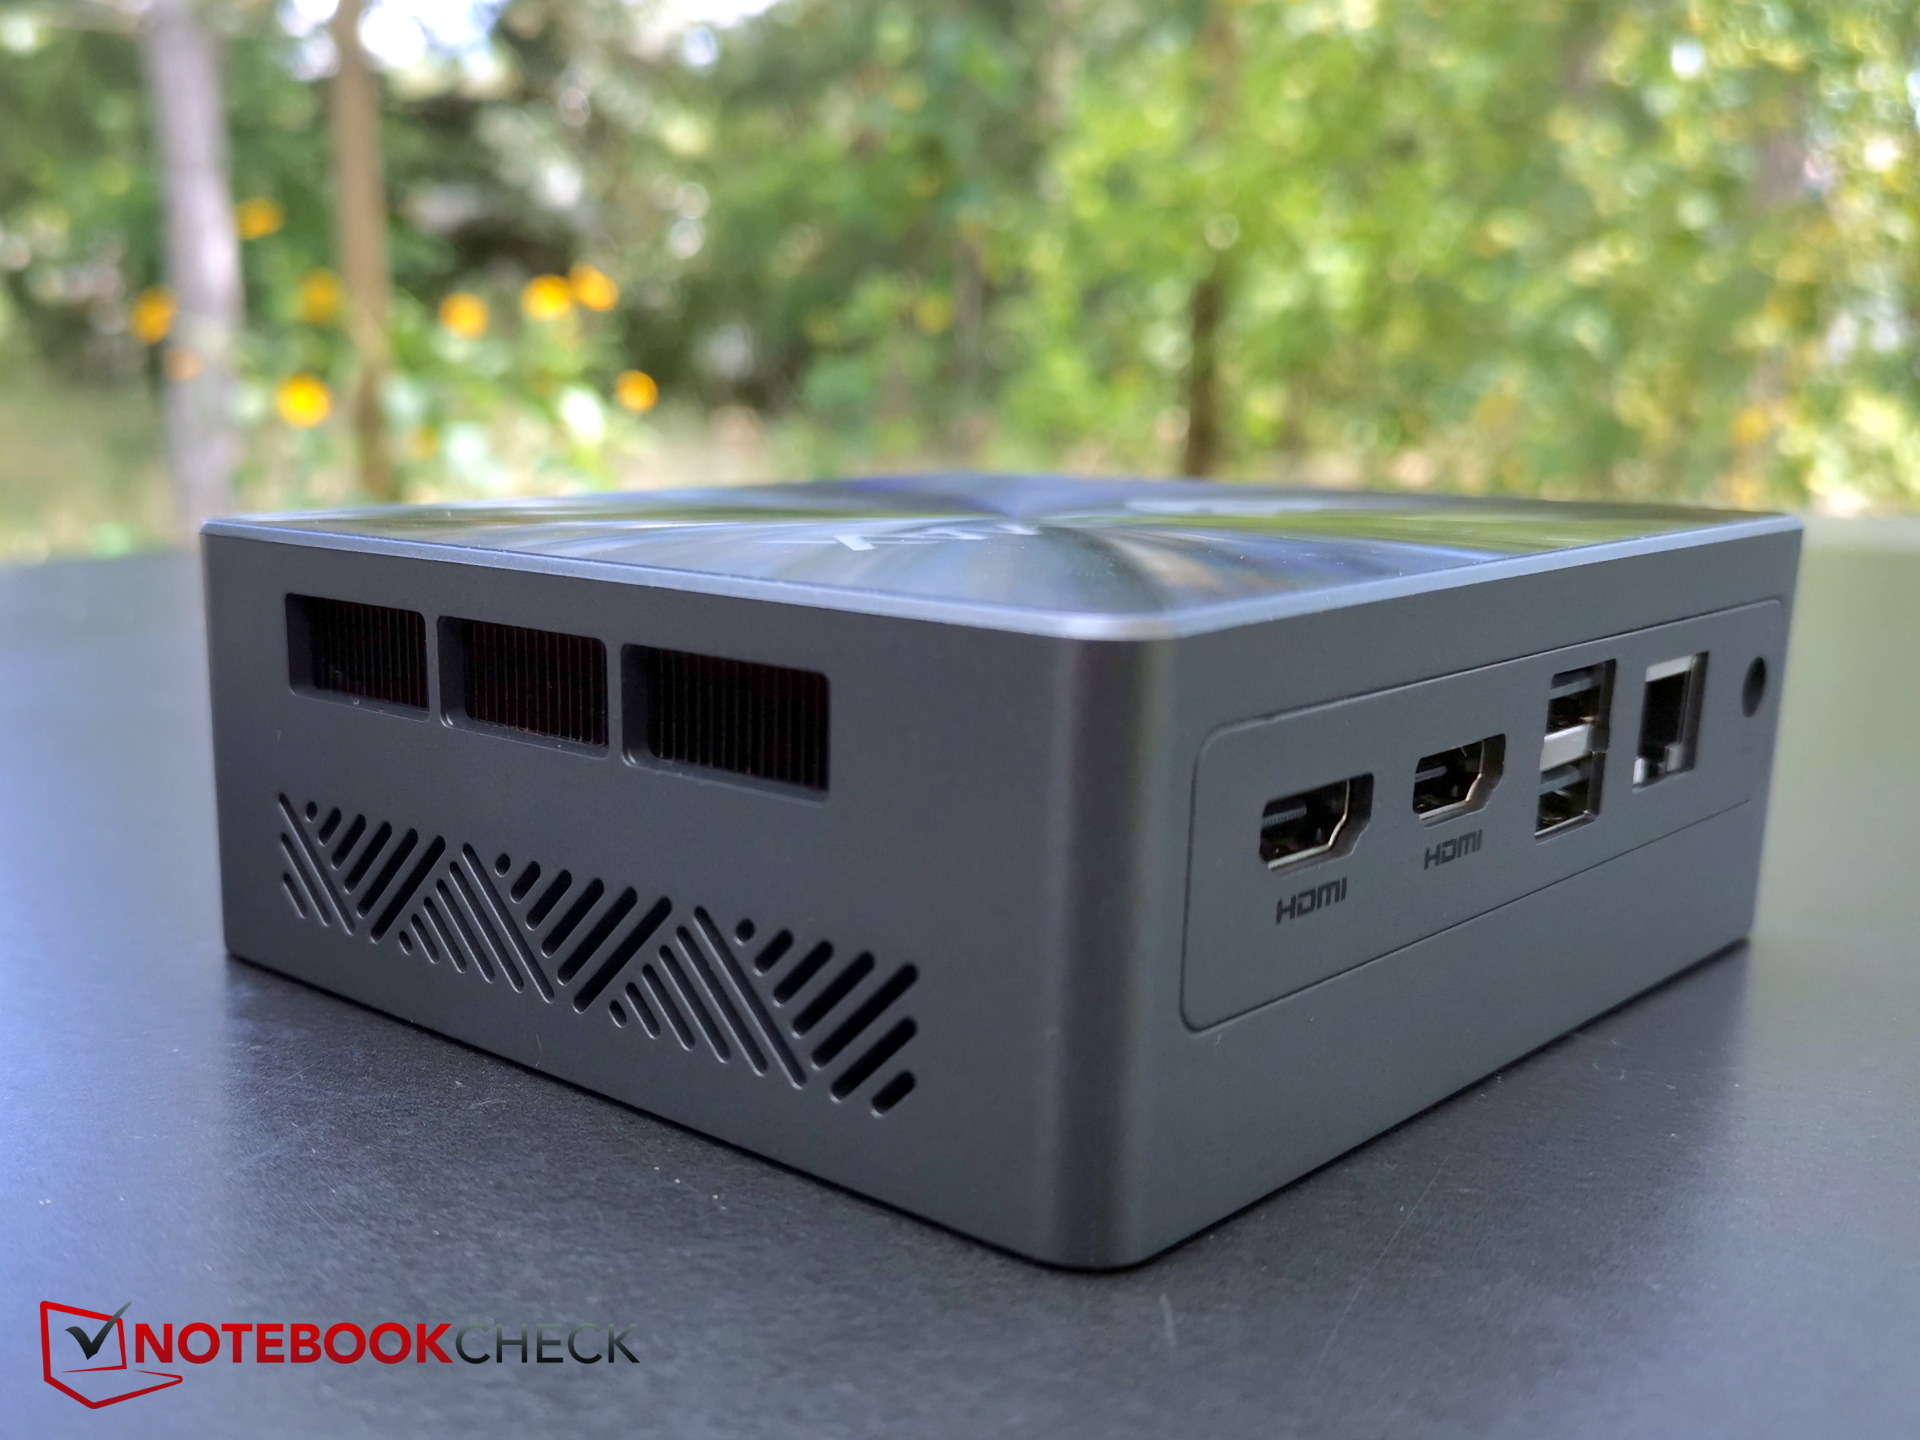 In-Depth BMAX B7 Power Mini PC Review: High Performance in a